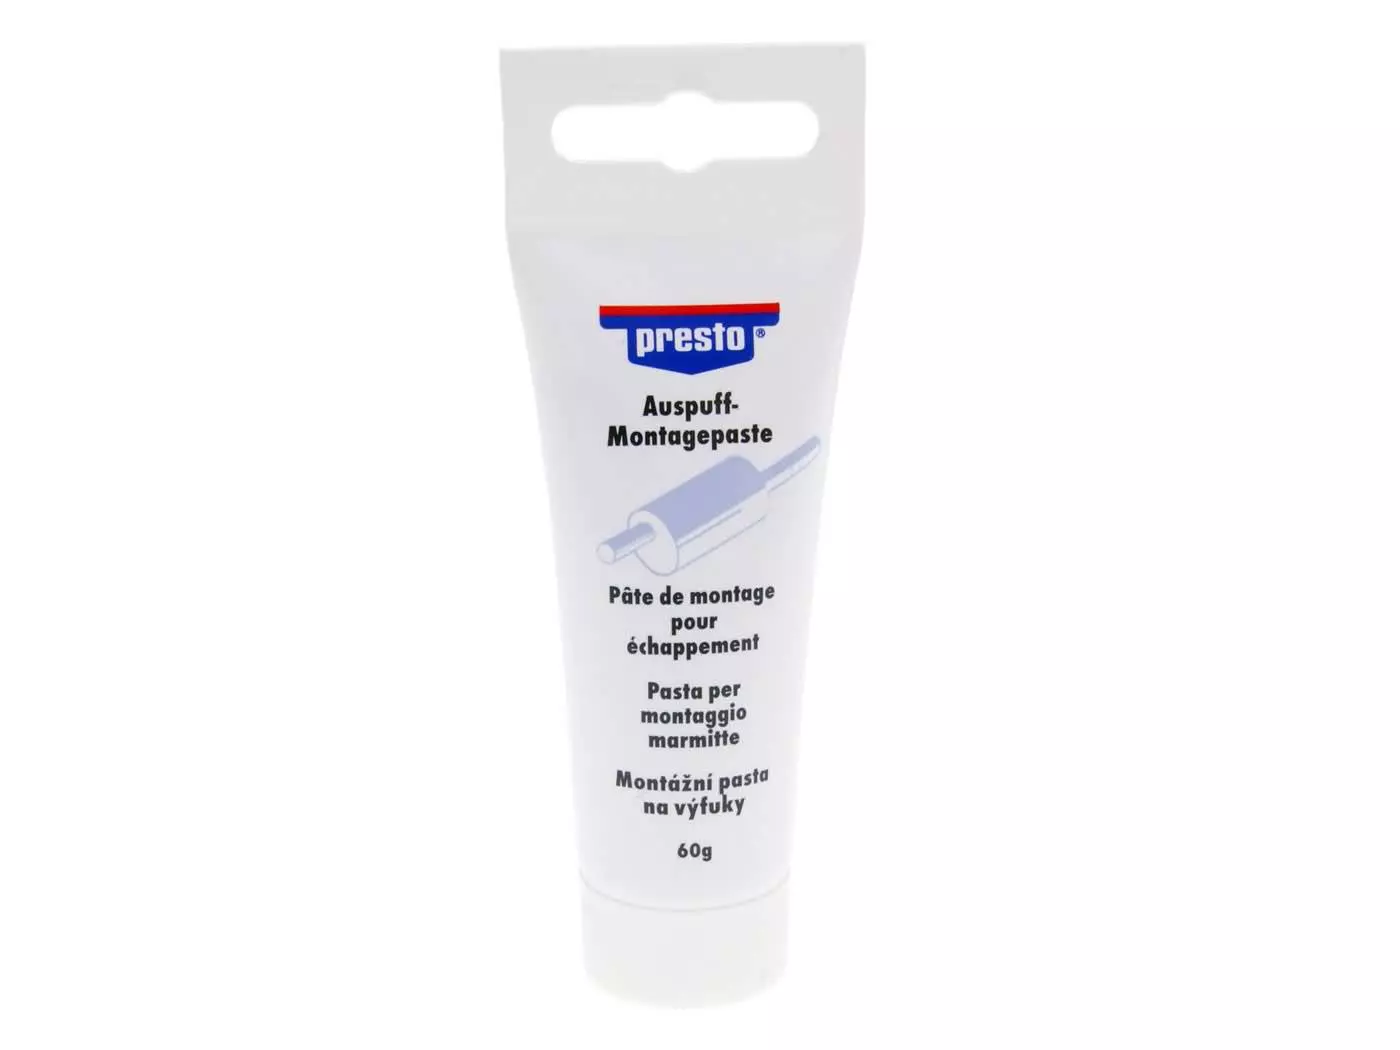 Exhaust Assembly Paste Presto 60g